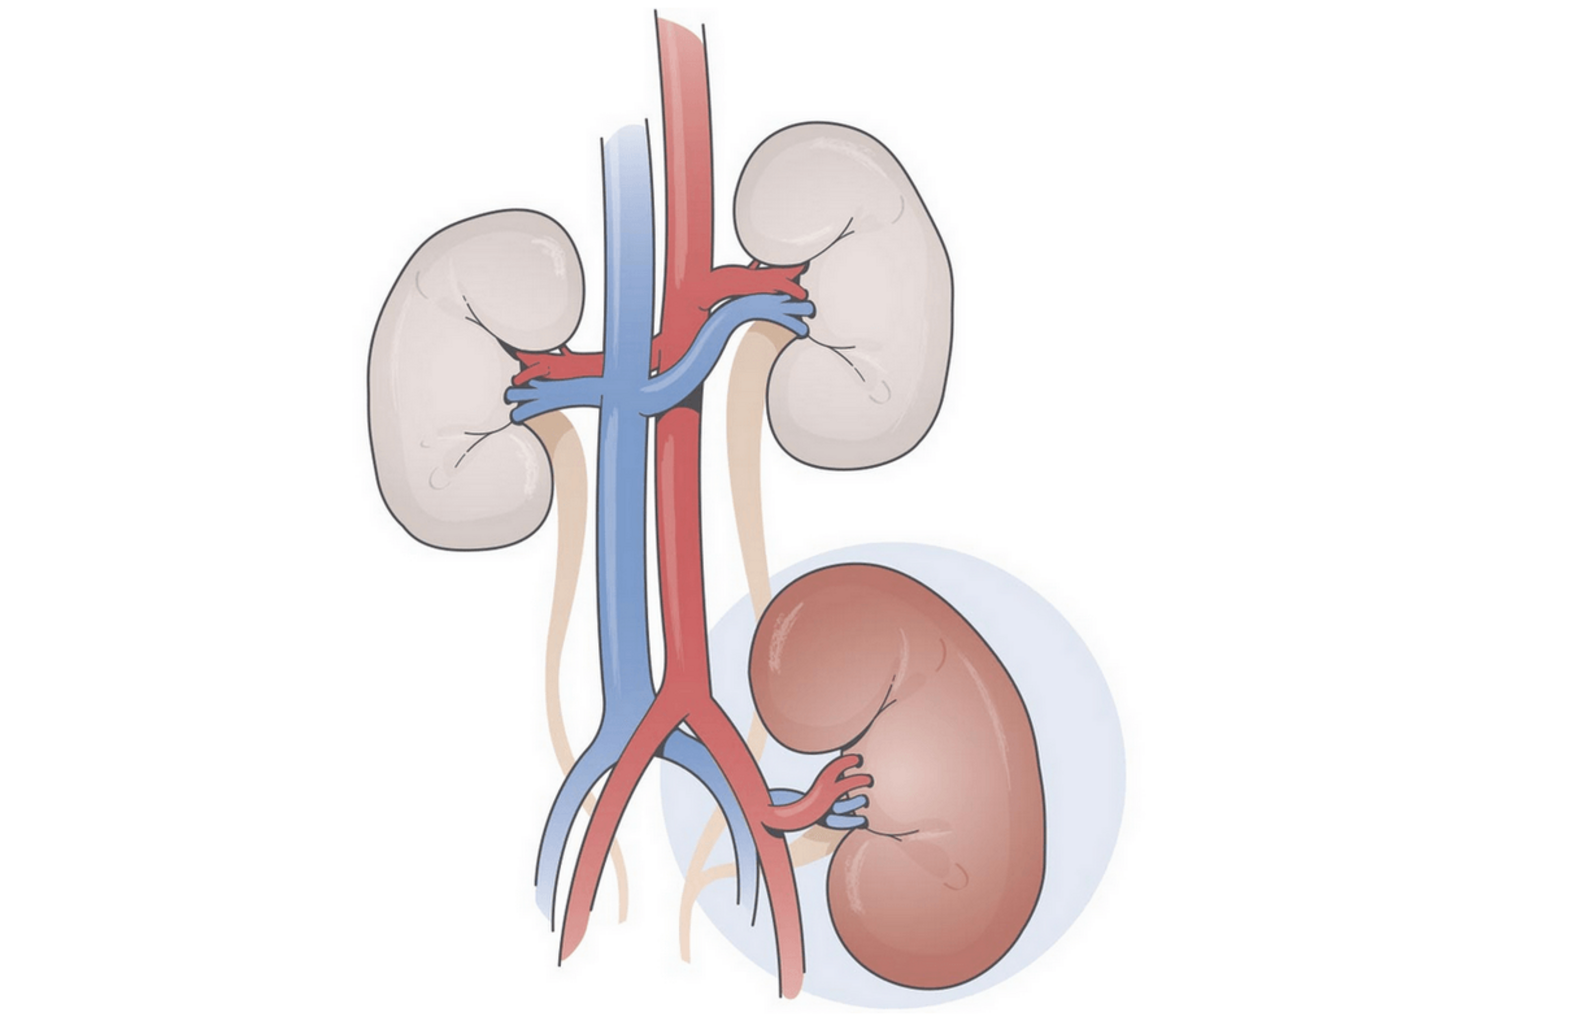 Drawing of a transplanted kidney